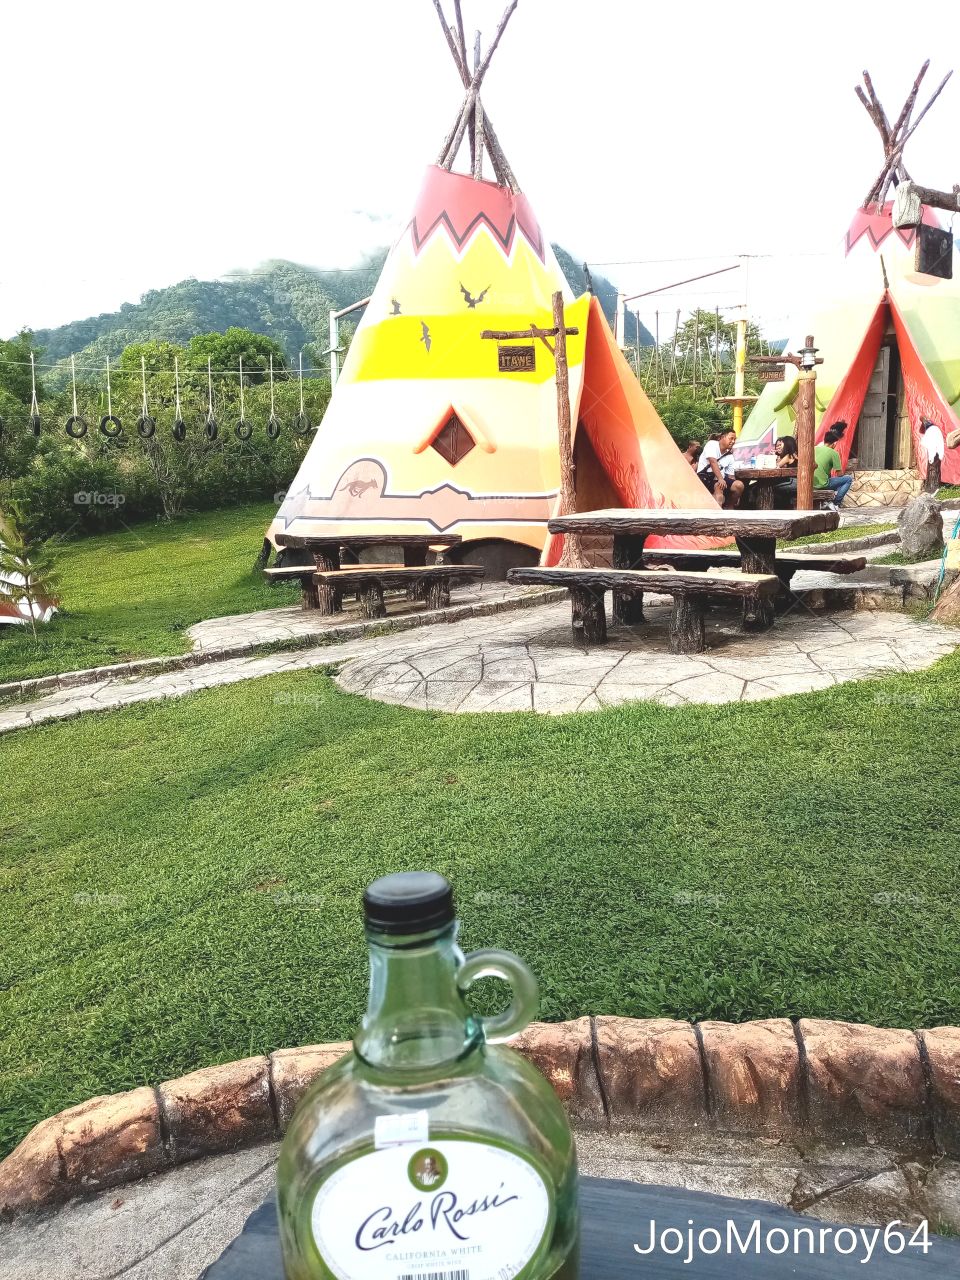 Staying on the Tepees